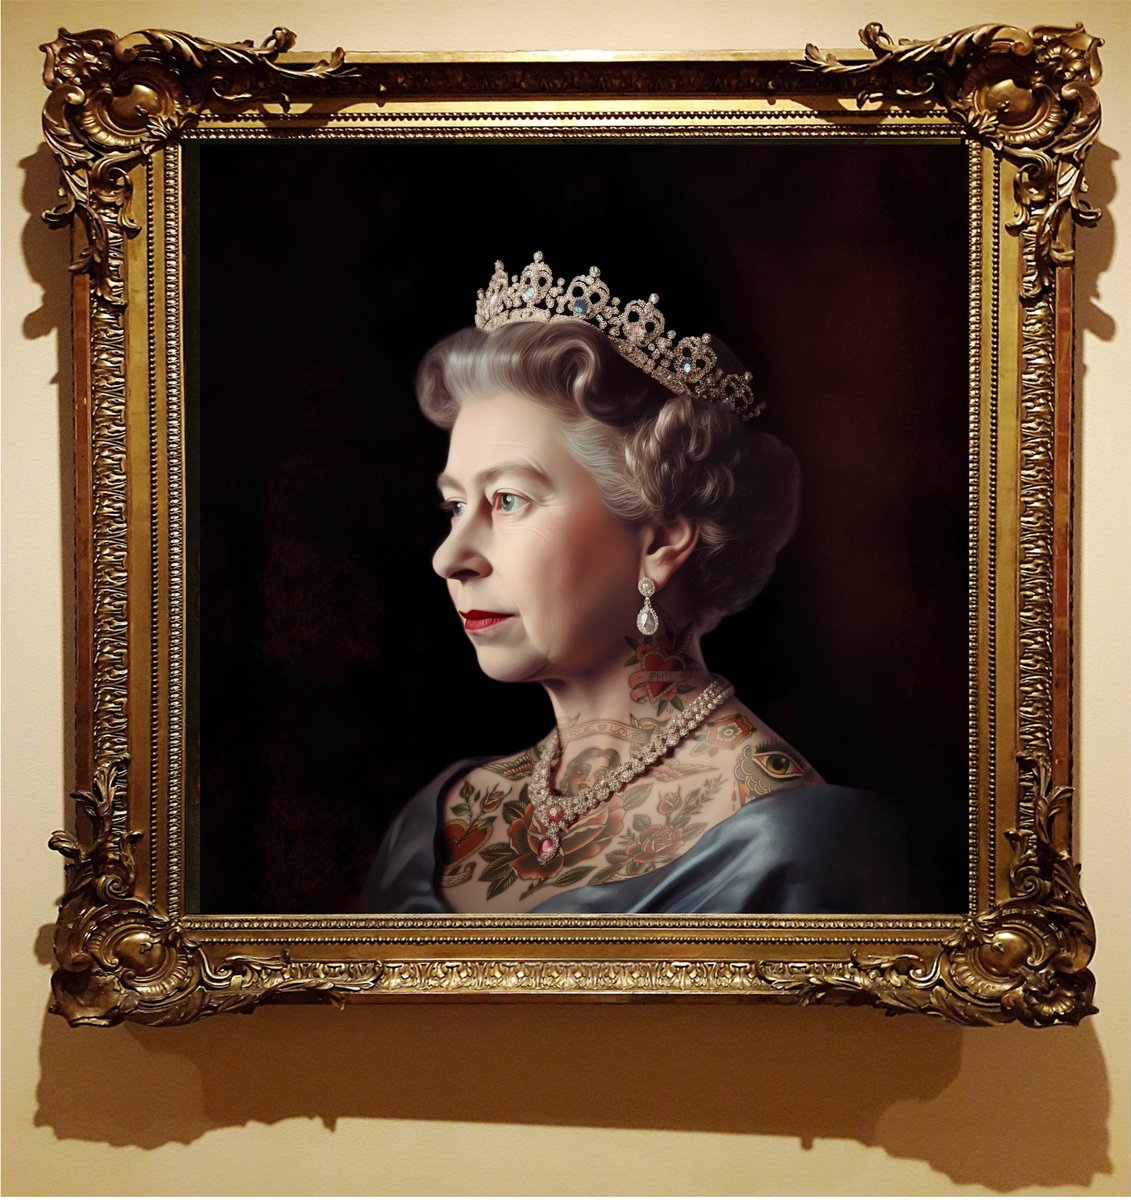 The Queen by Slasky